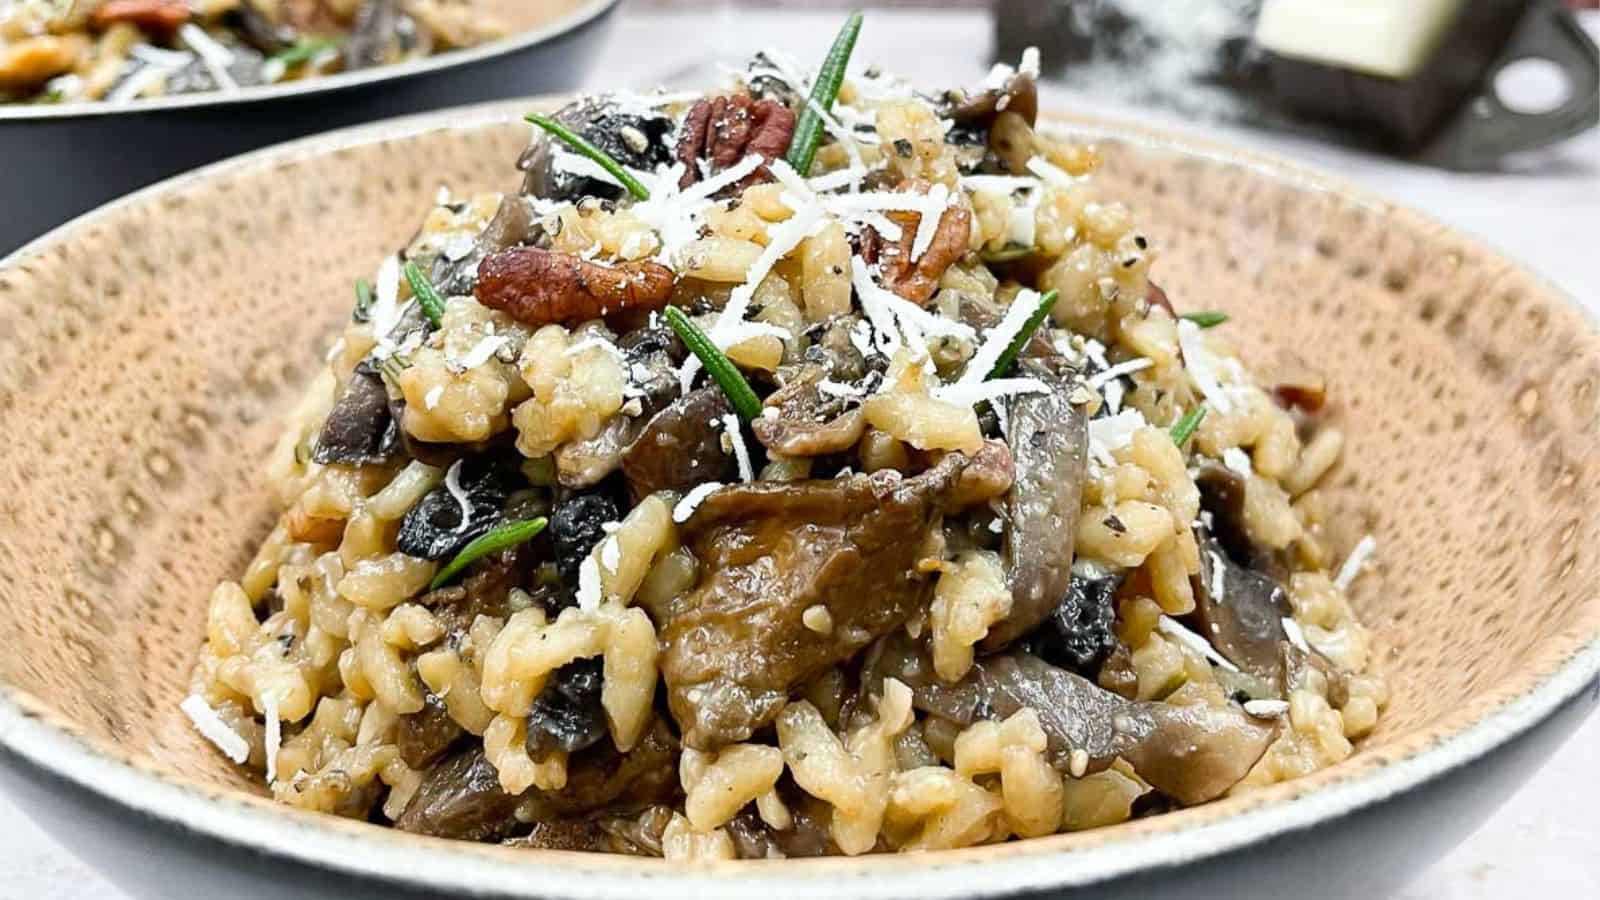 A bowl of risotto with mushrooms and parmesan cheese.